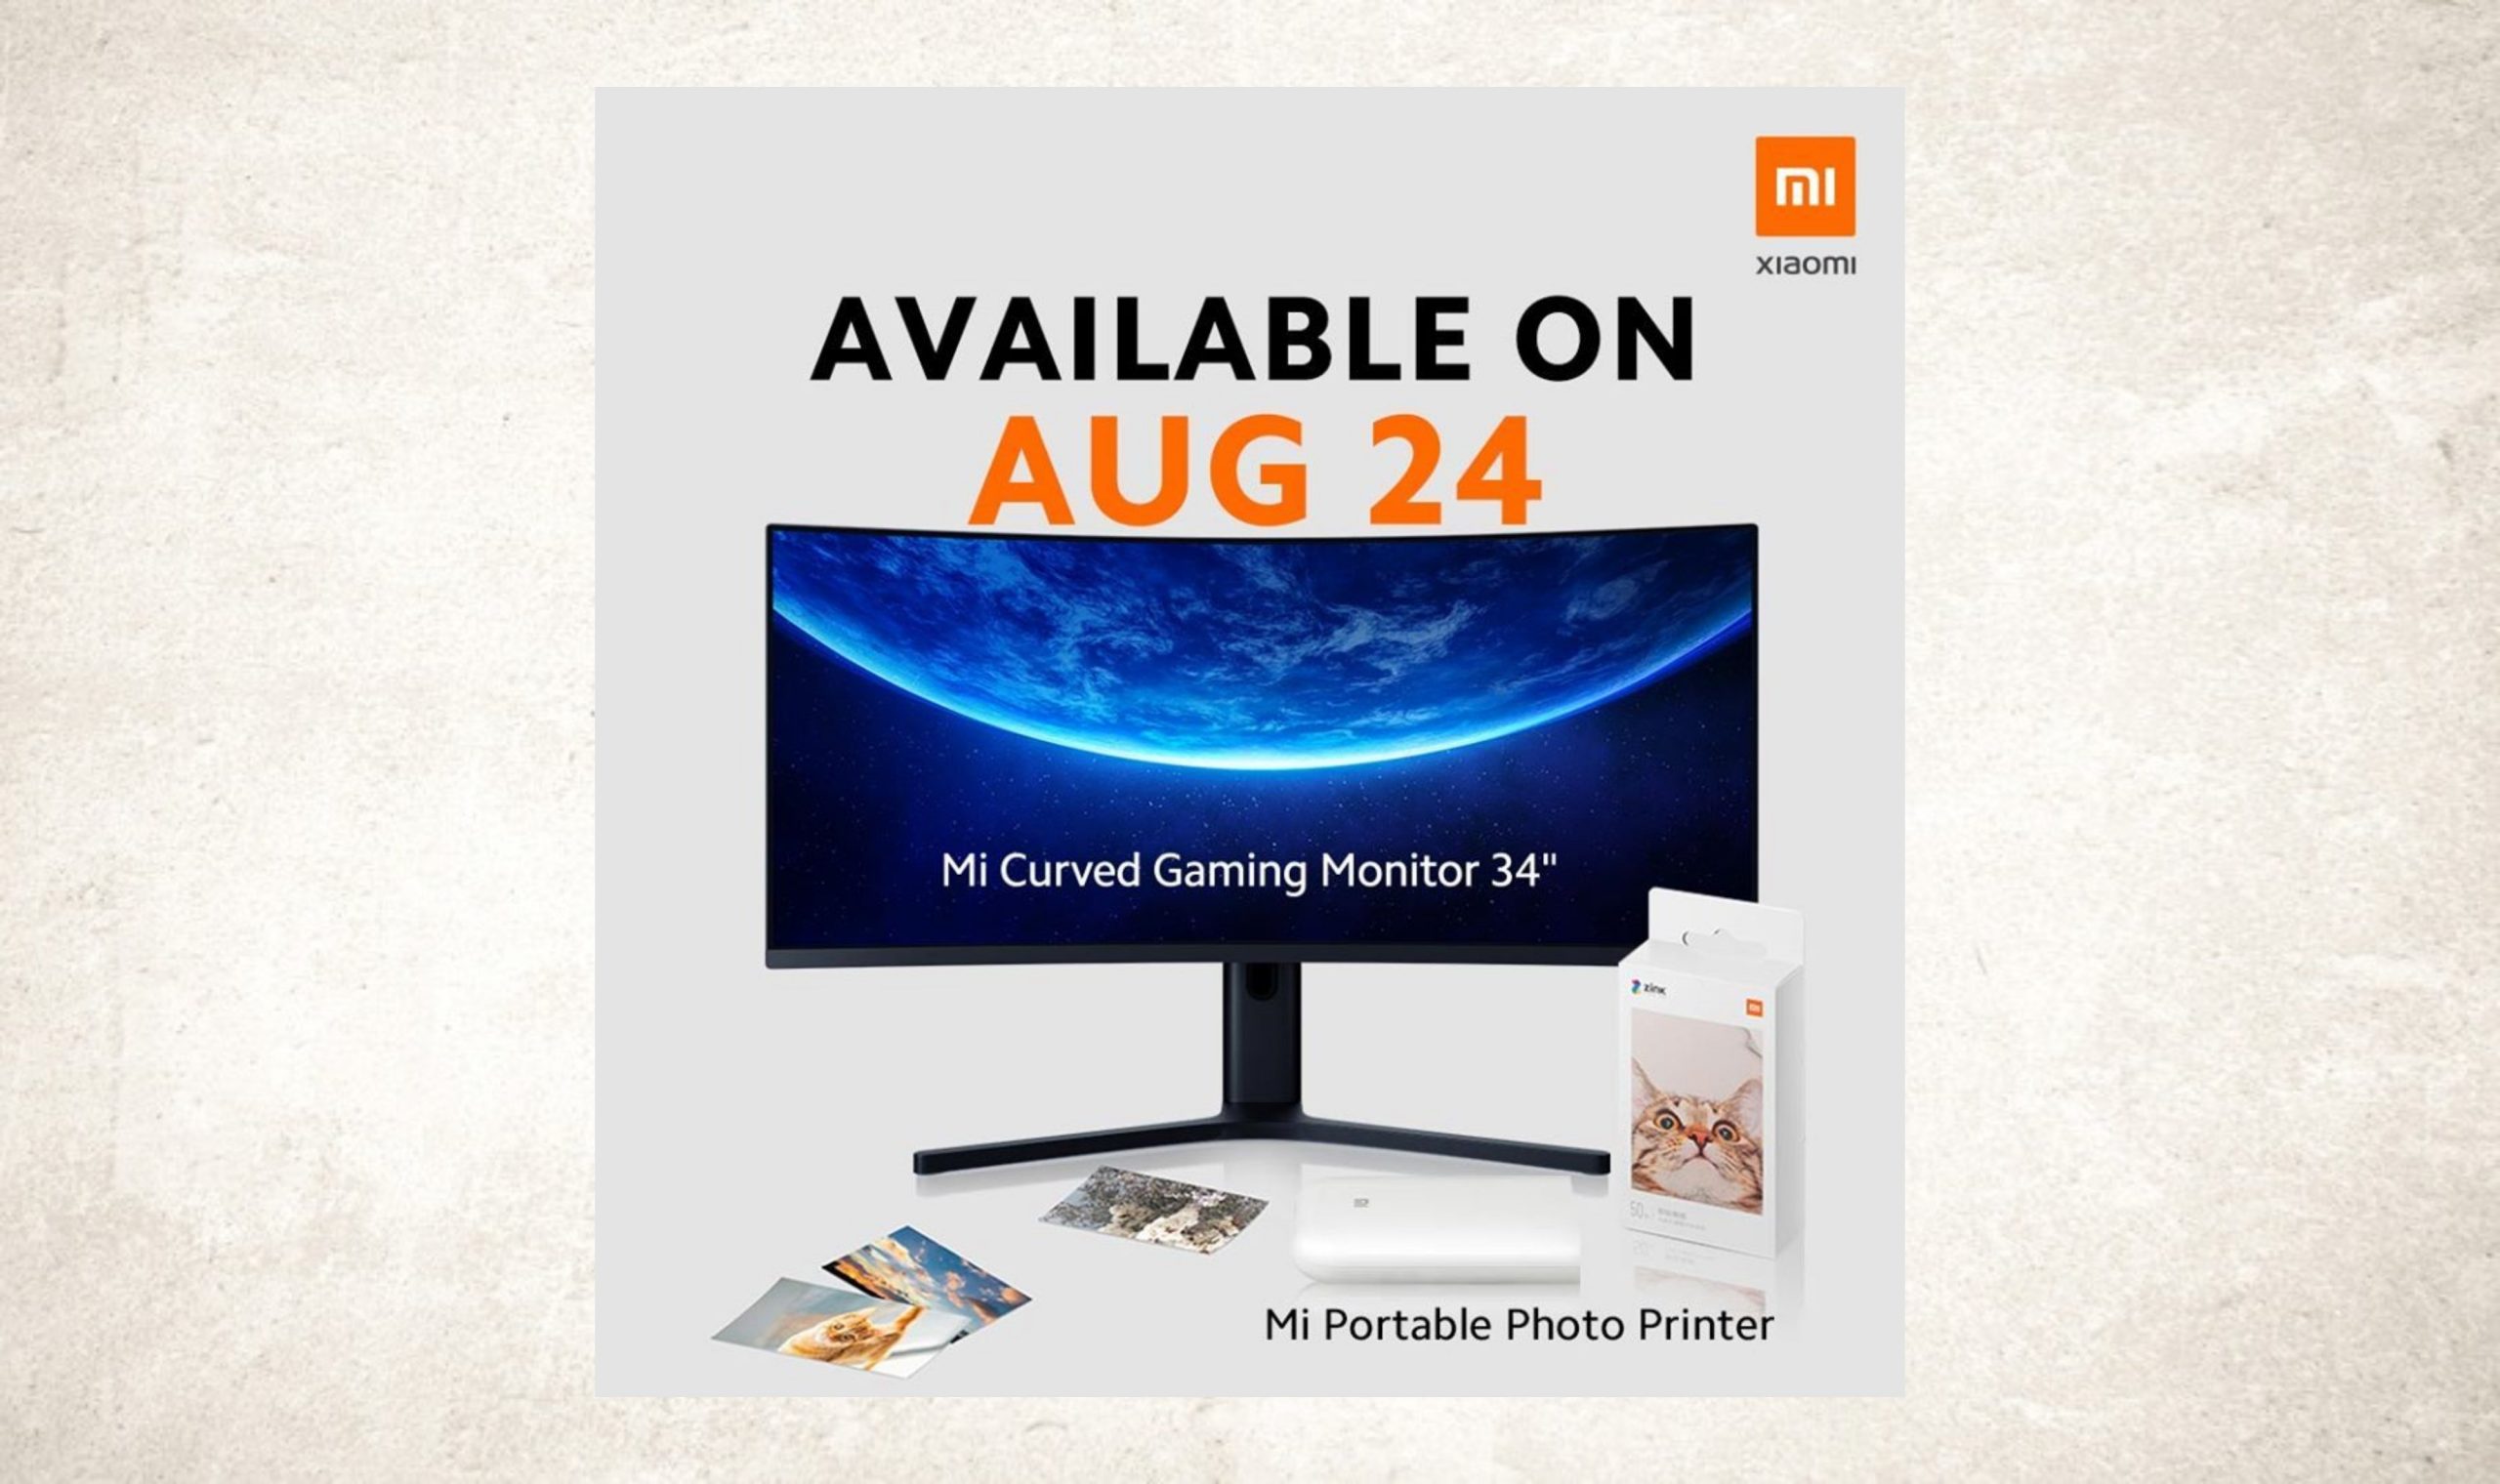 Xiaomi Mi Curved Gaming Monitor 34” and Mi Portable Photo Printer launching in Malaysia on August 24